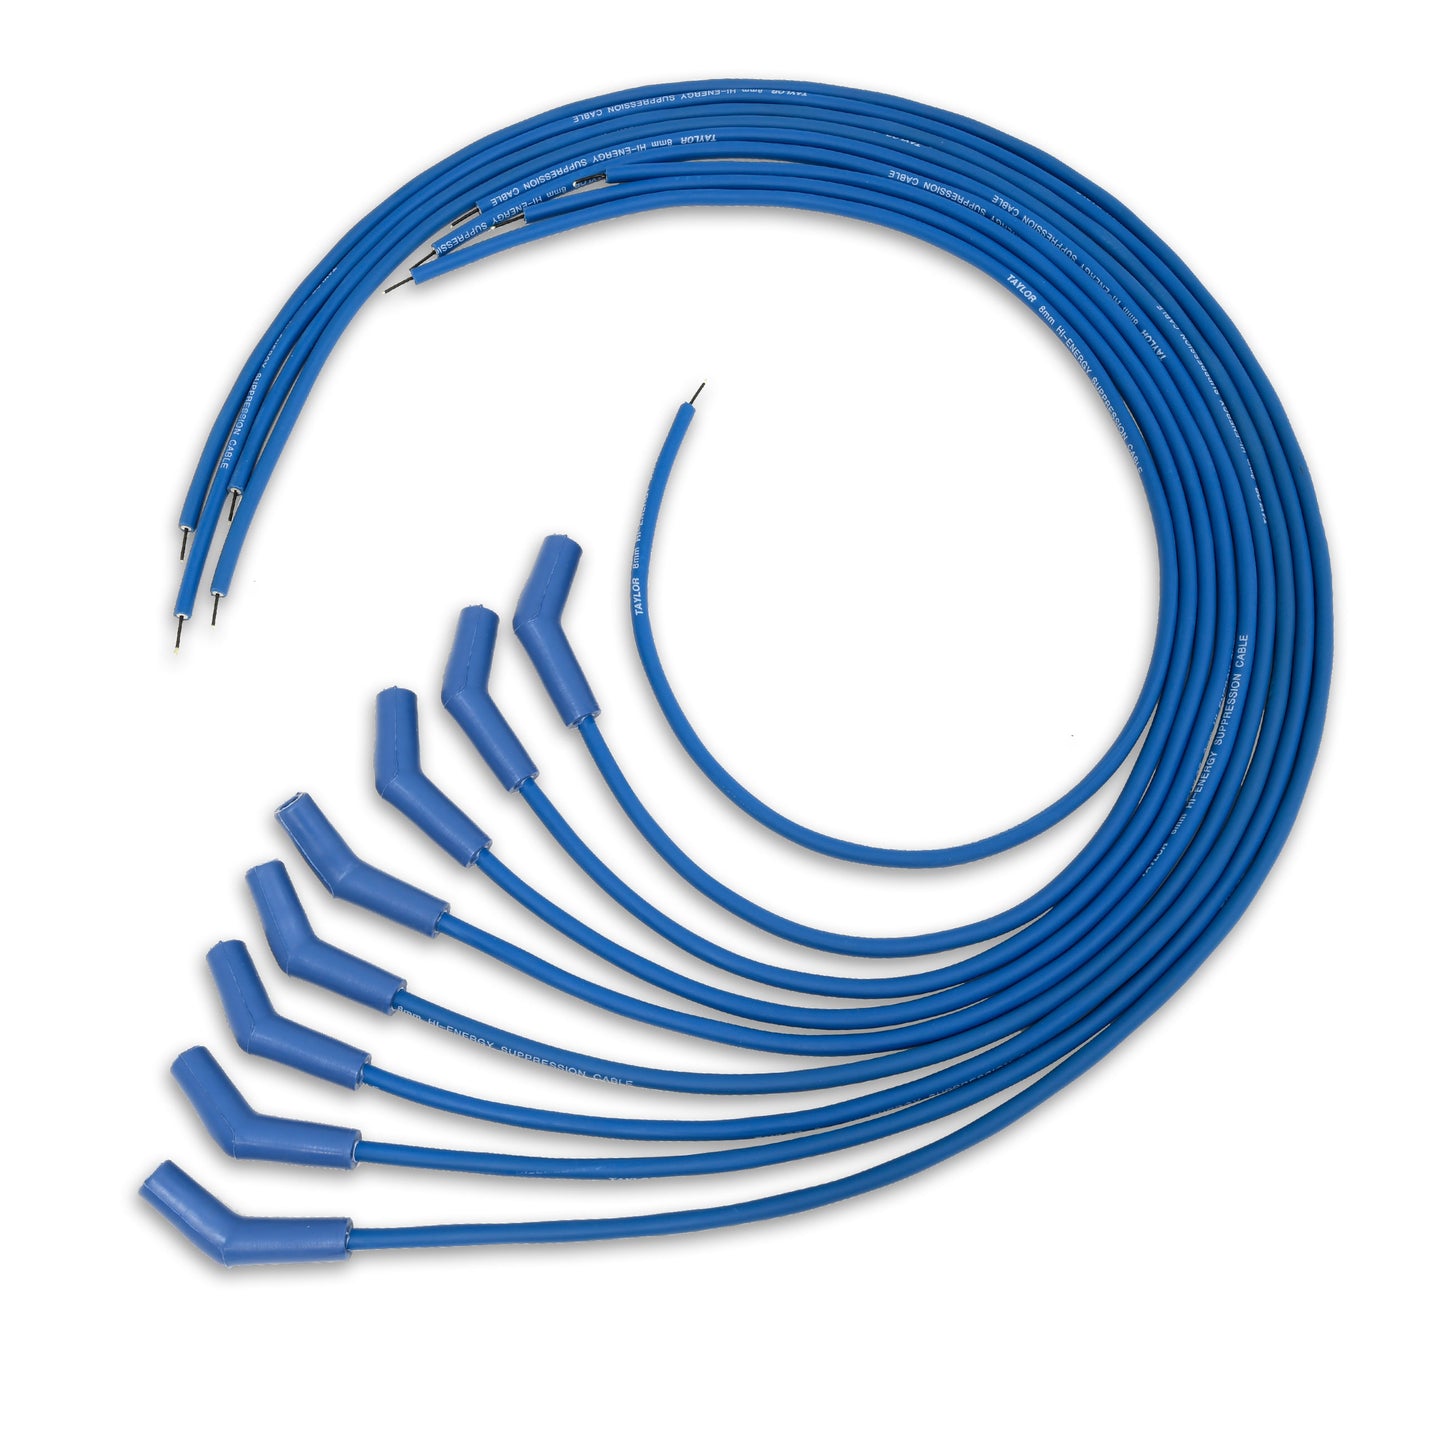 Taylor Cable 60653 8mm hi-energy Ignition Wires univ 8cyl 135 res blue